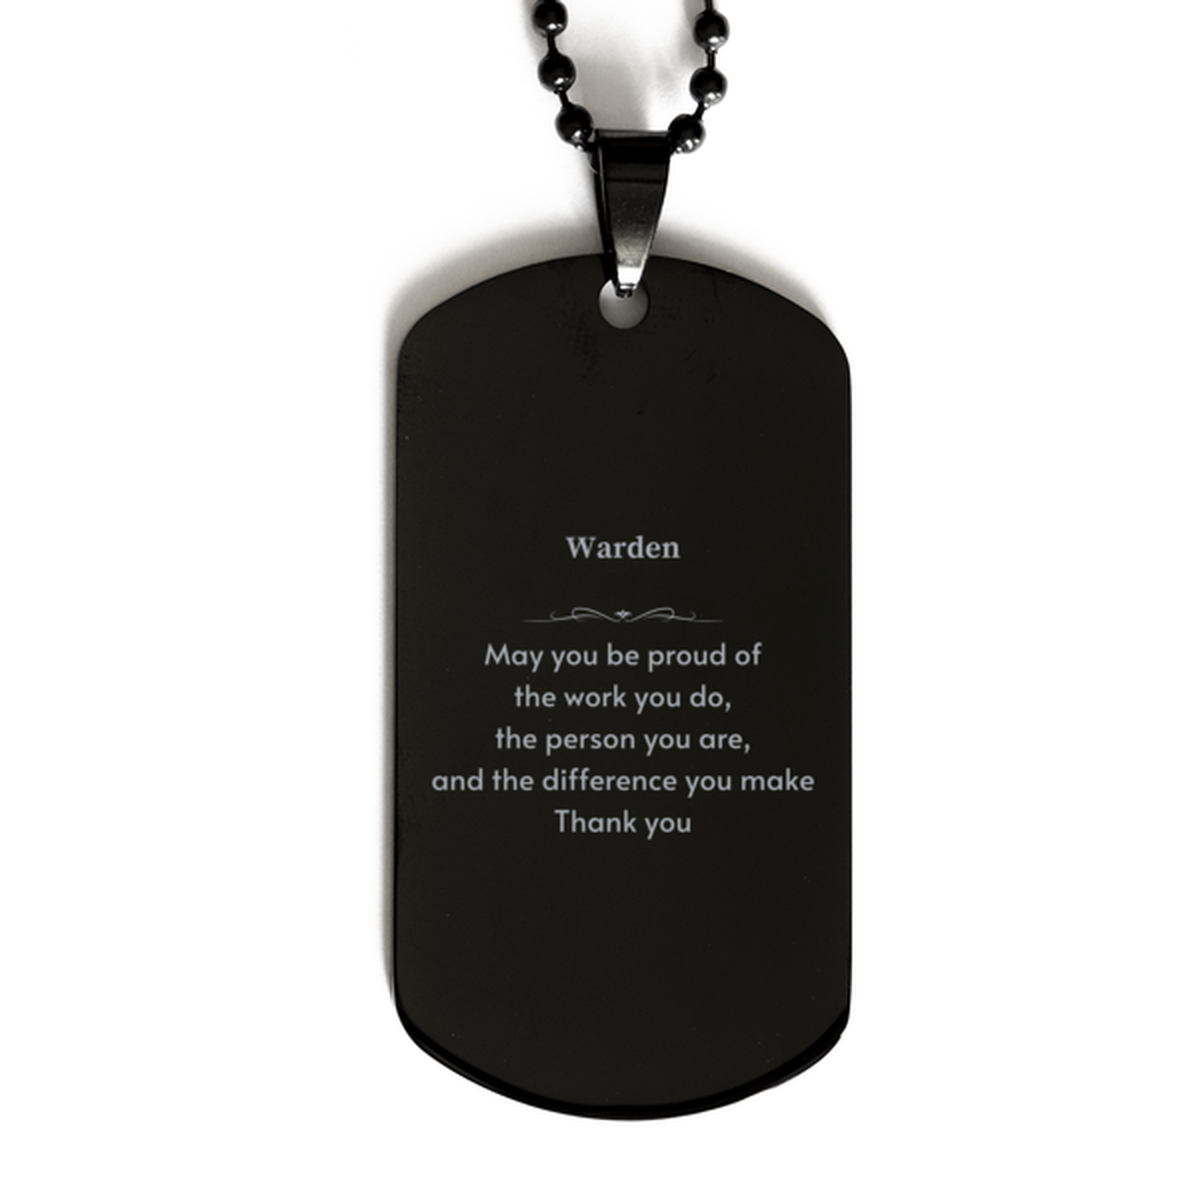 Heartwarming Black Dog Tag Retirement Coworkers Gifts for Warden, Warden May You be proud of the work you do, the person you are Gifts for Boss Men Women Friends